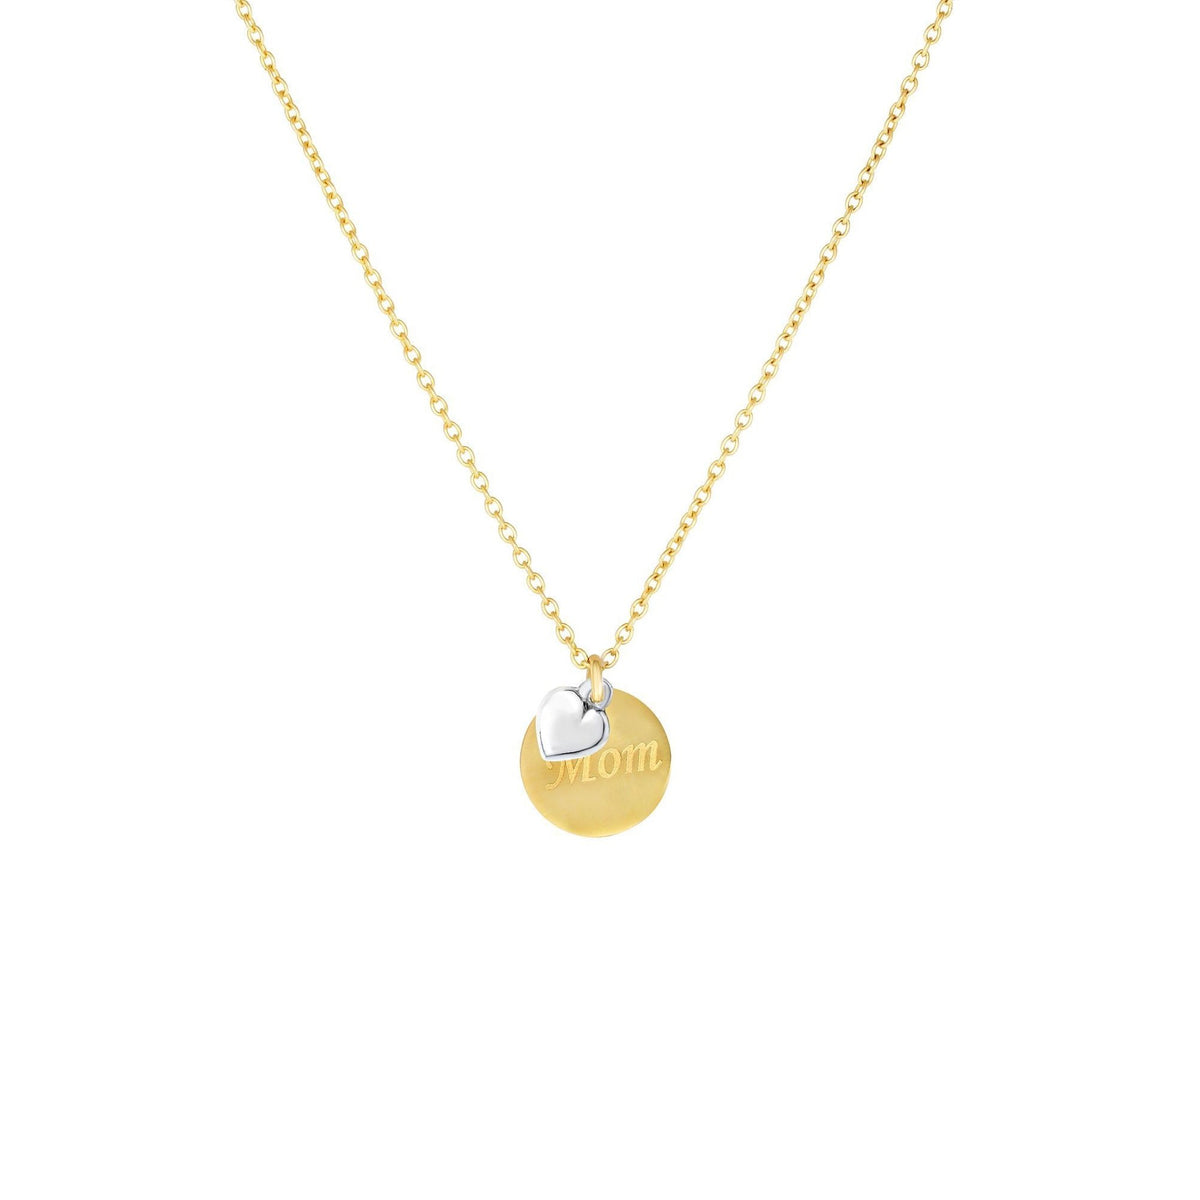 14K Two Tone Gold Polished Mom Disc Pendant Necklace